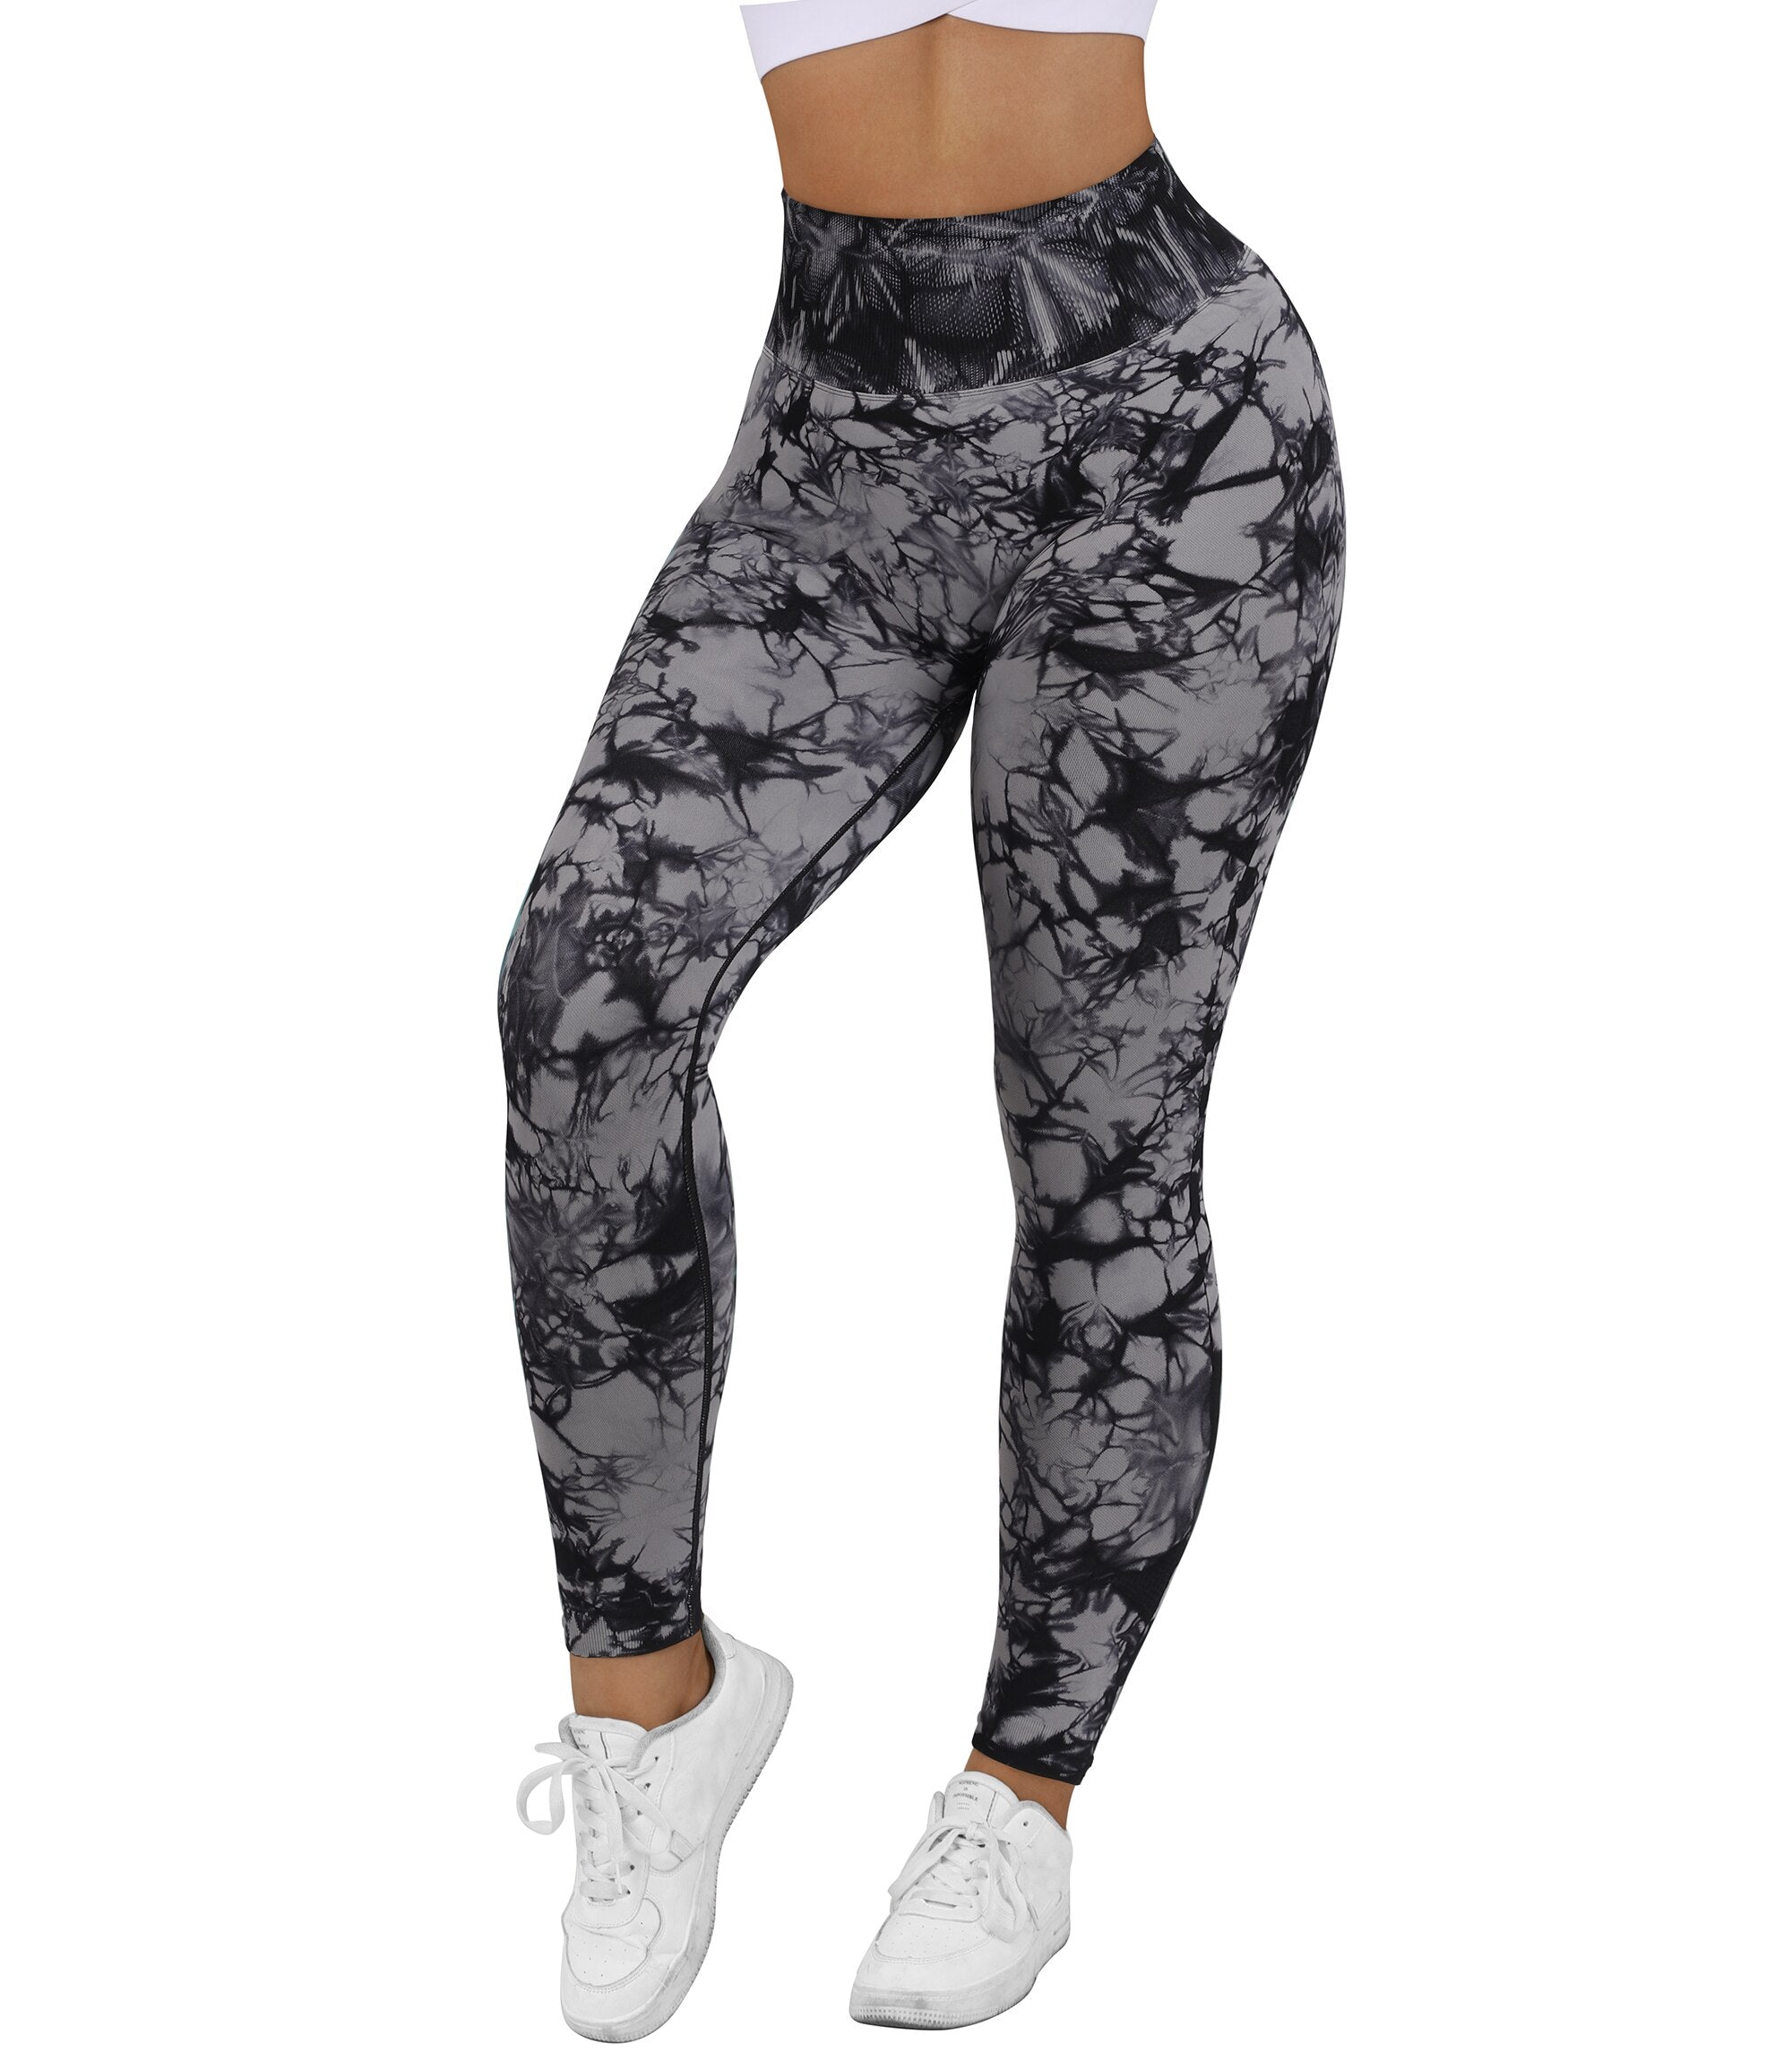 Nepoagym 25 Rhythm Women Yoga Leggings No Front Seam Buttery Soft Woman  Workout Leggins Pant For Gym Sports Fitness D